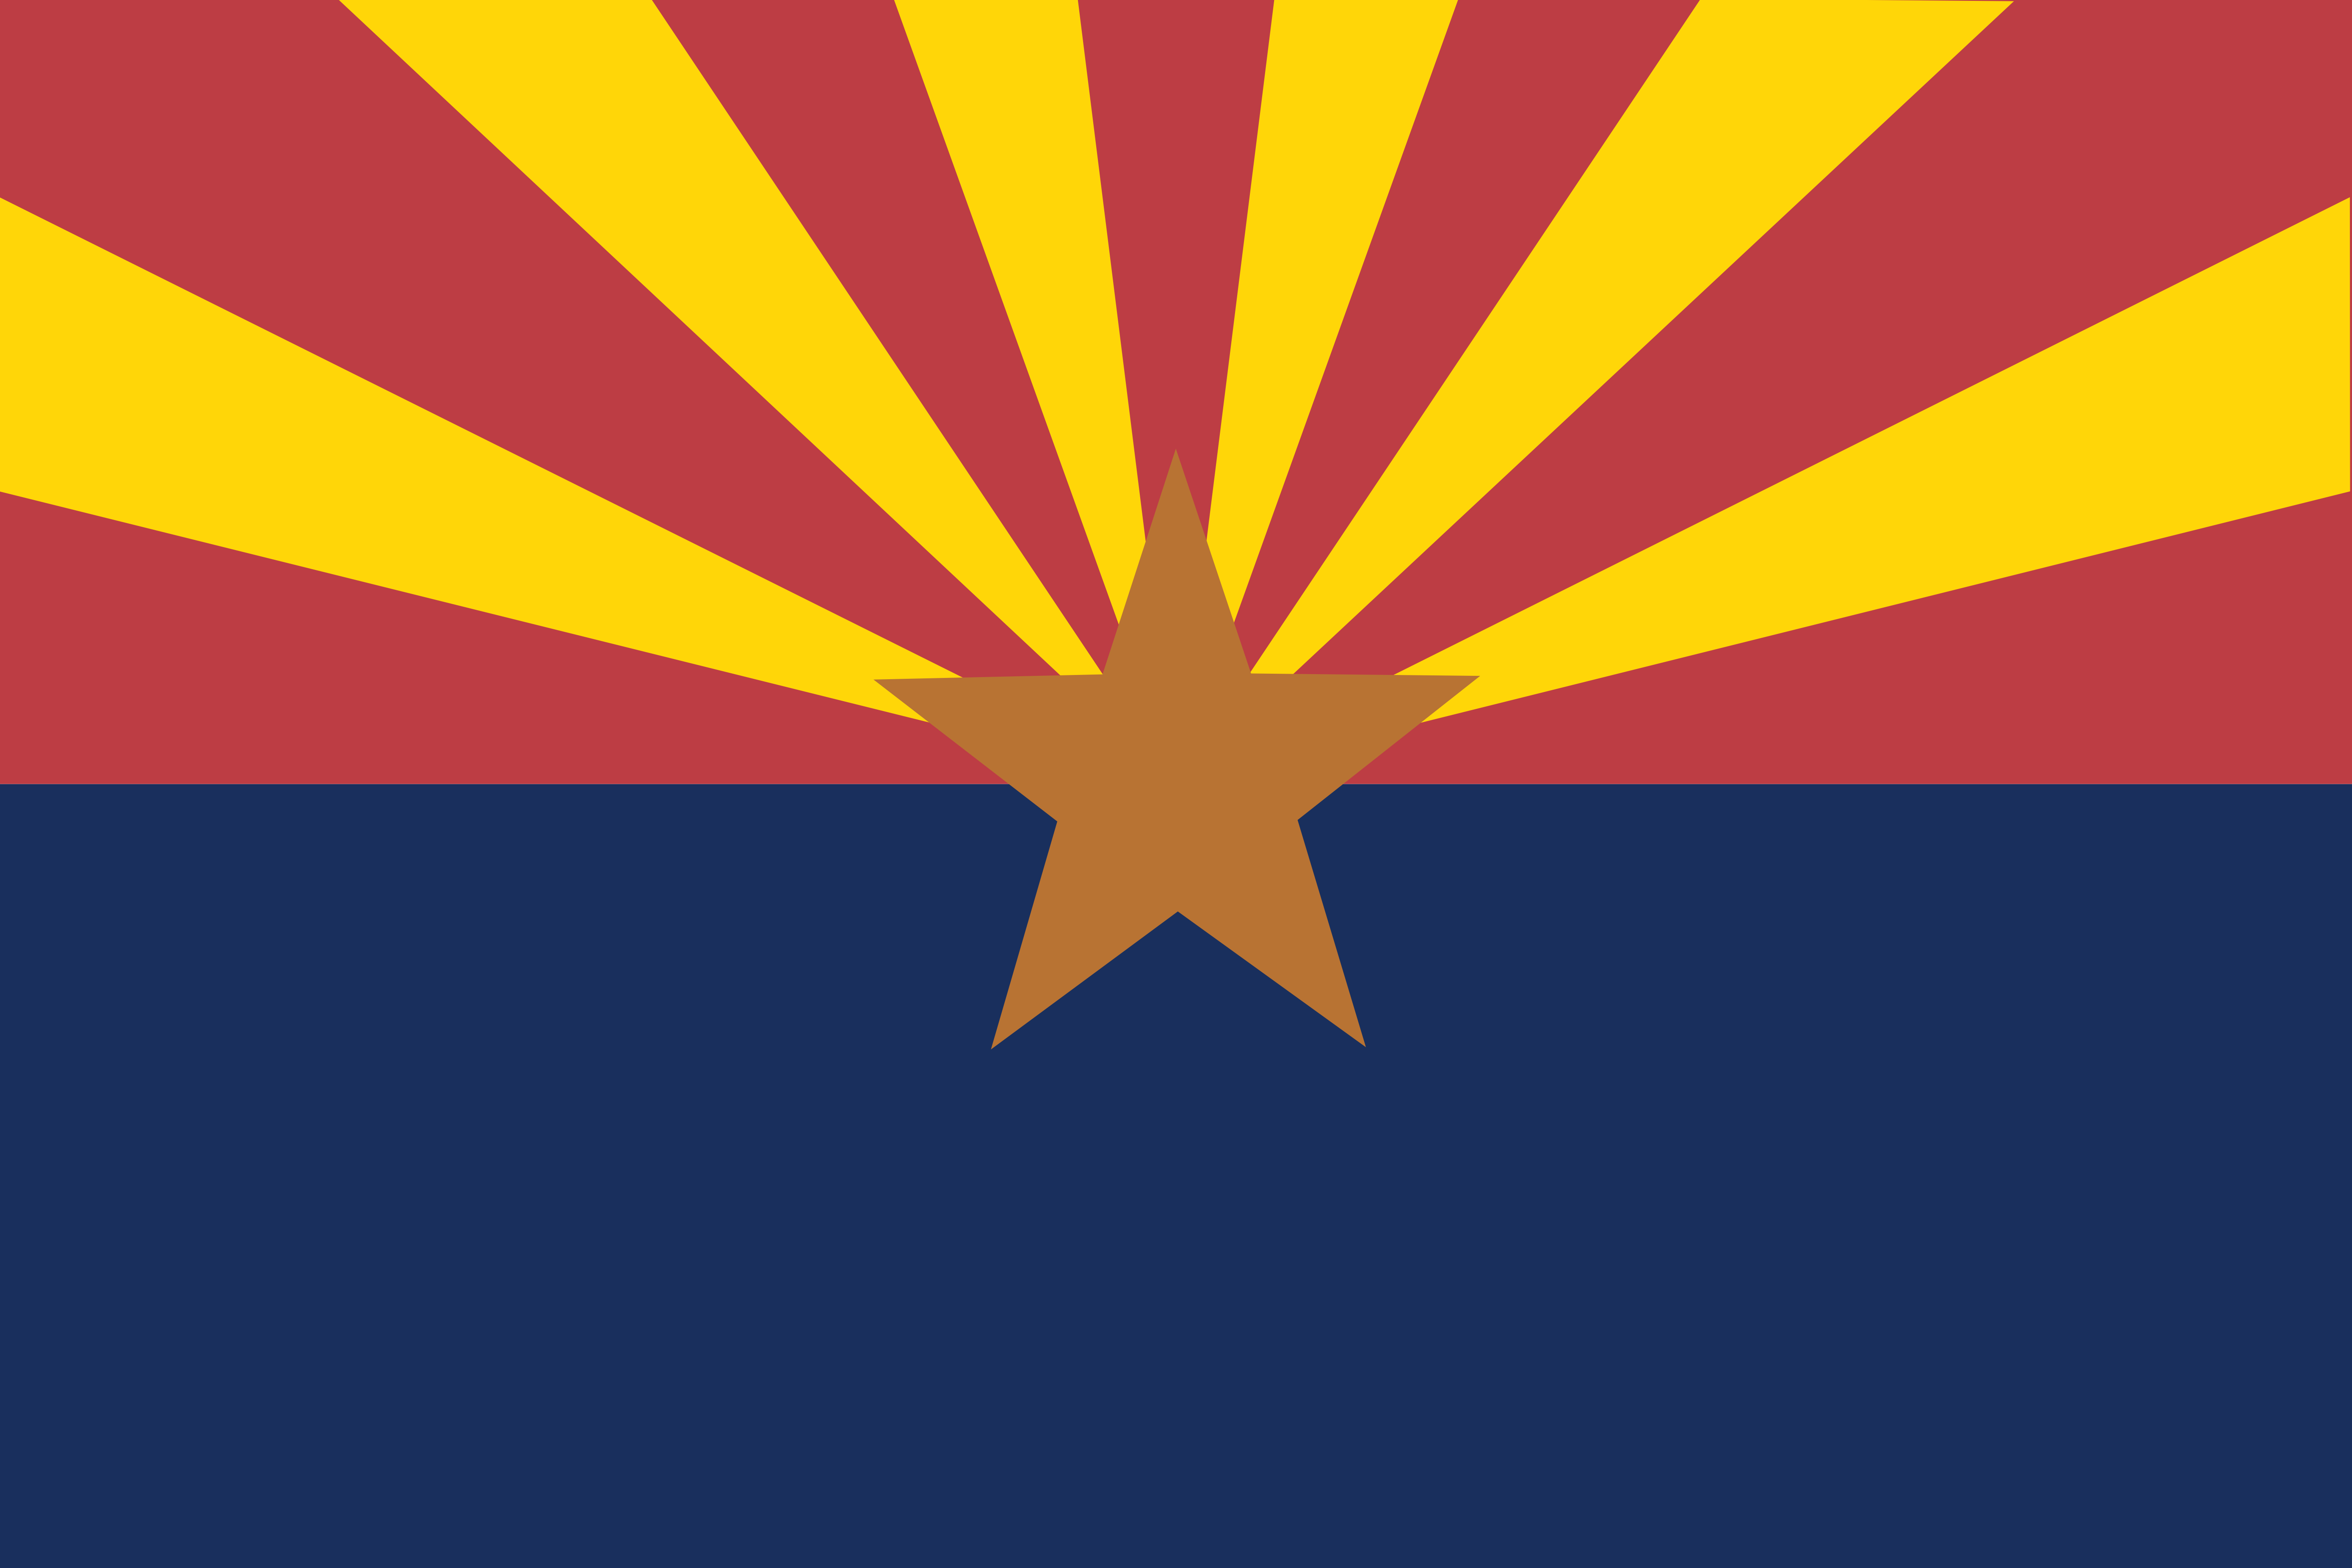 Usa Arizona Flag Flags of the World openclipart.org commons ...